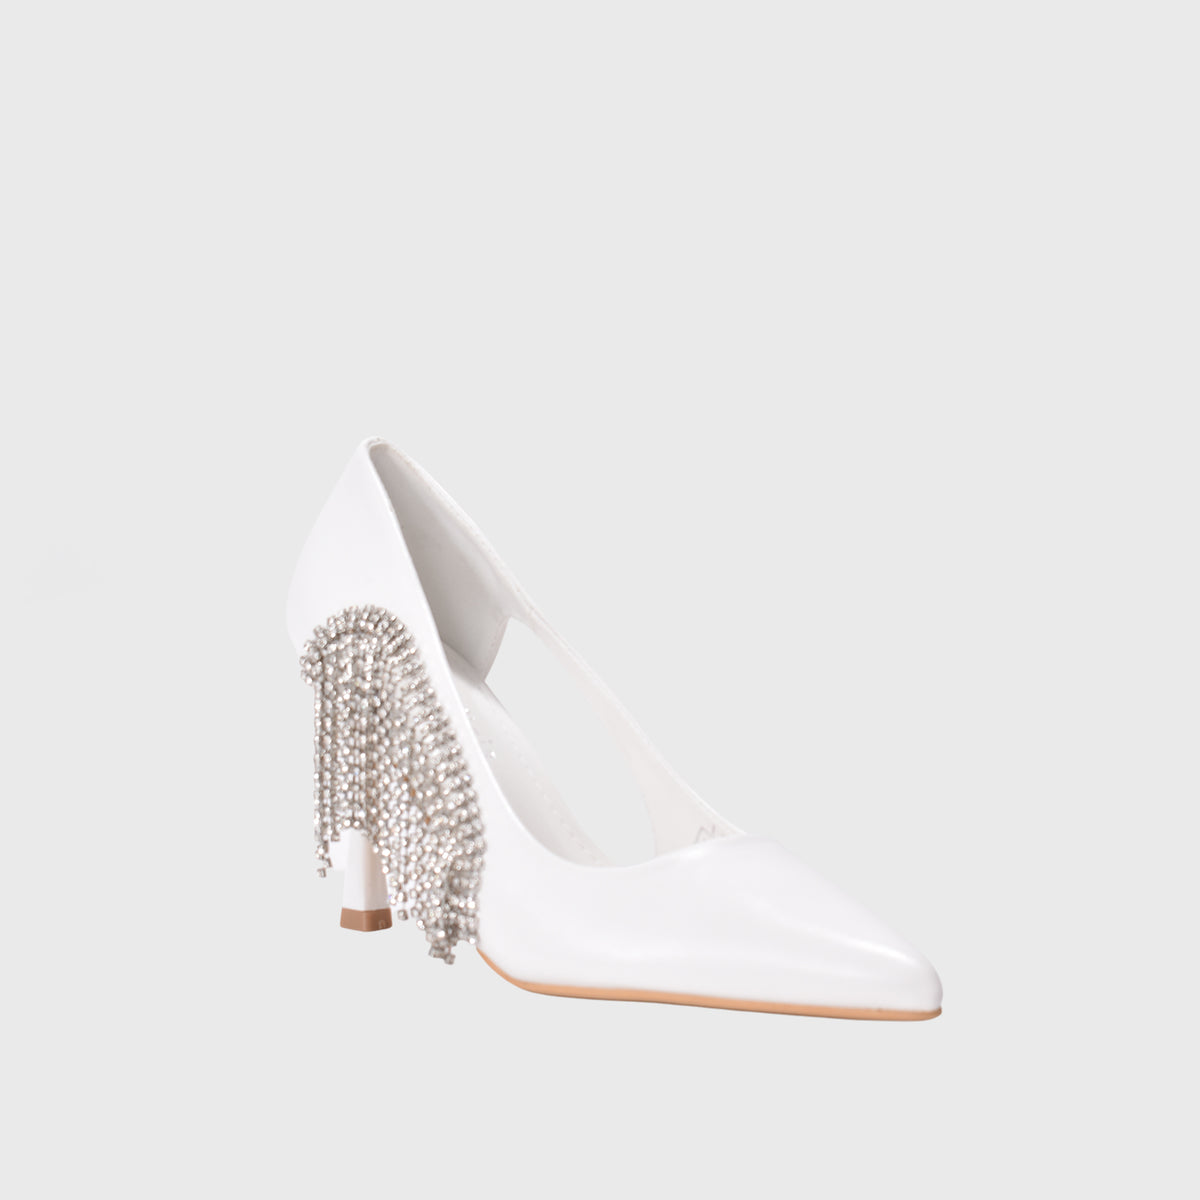 White High Heel Shoes With a Chain